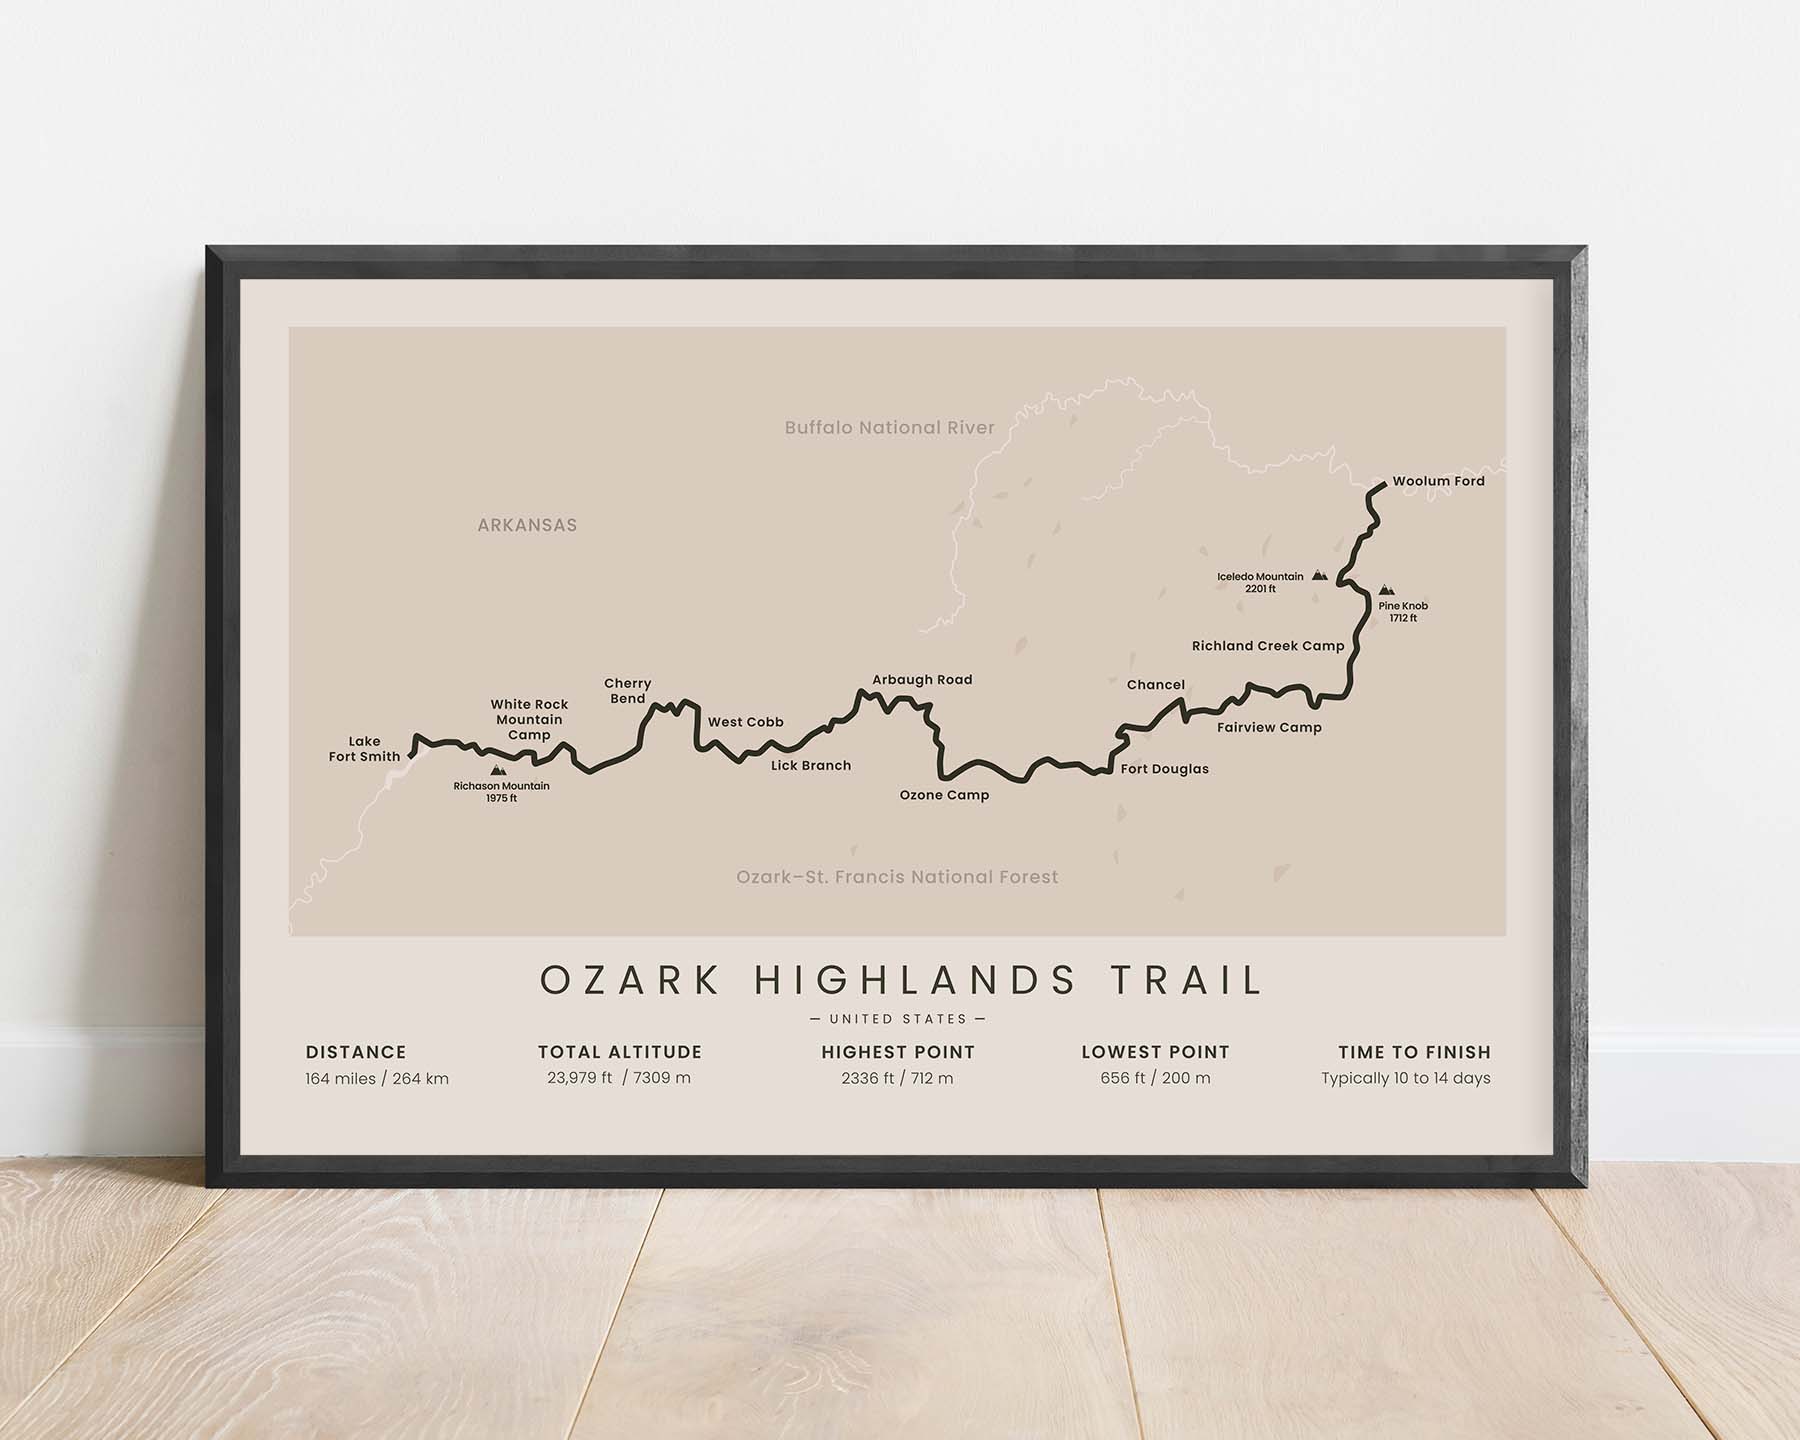 Ozark Highlands Trail (Arkansas, Ozark National Forest, Lake Fort Smith to Woolum Ford, Lake Fort Smith State Park to Buffalo National River, Ozark Mountains) Route Wall Map with Beige Background